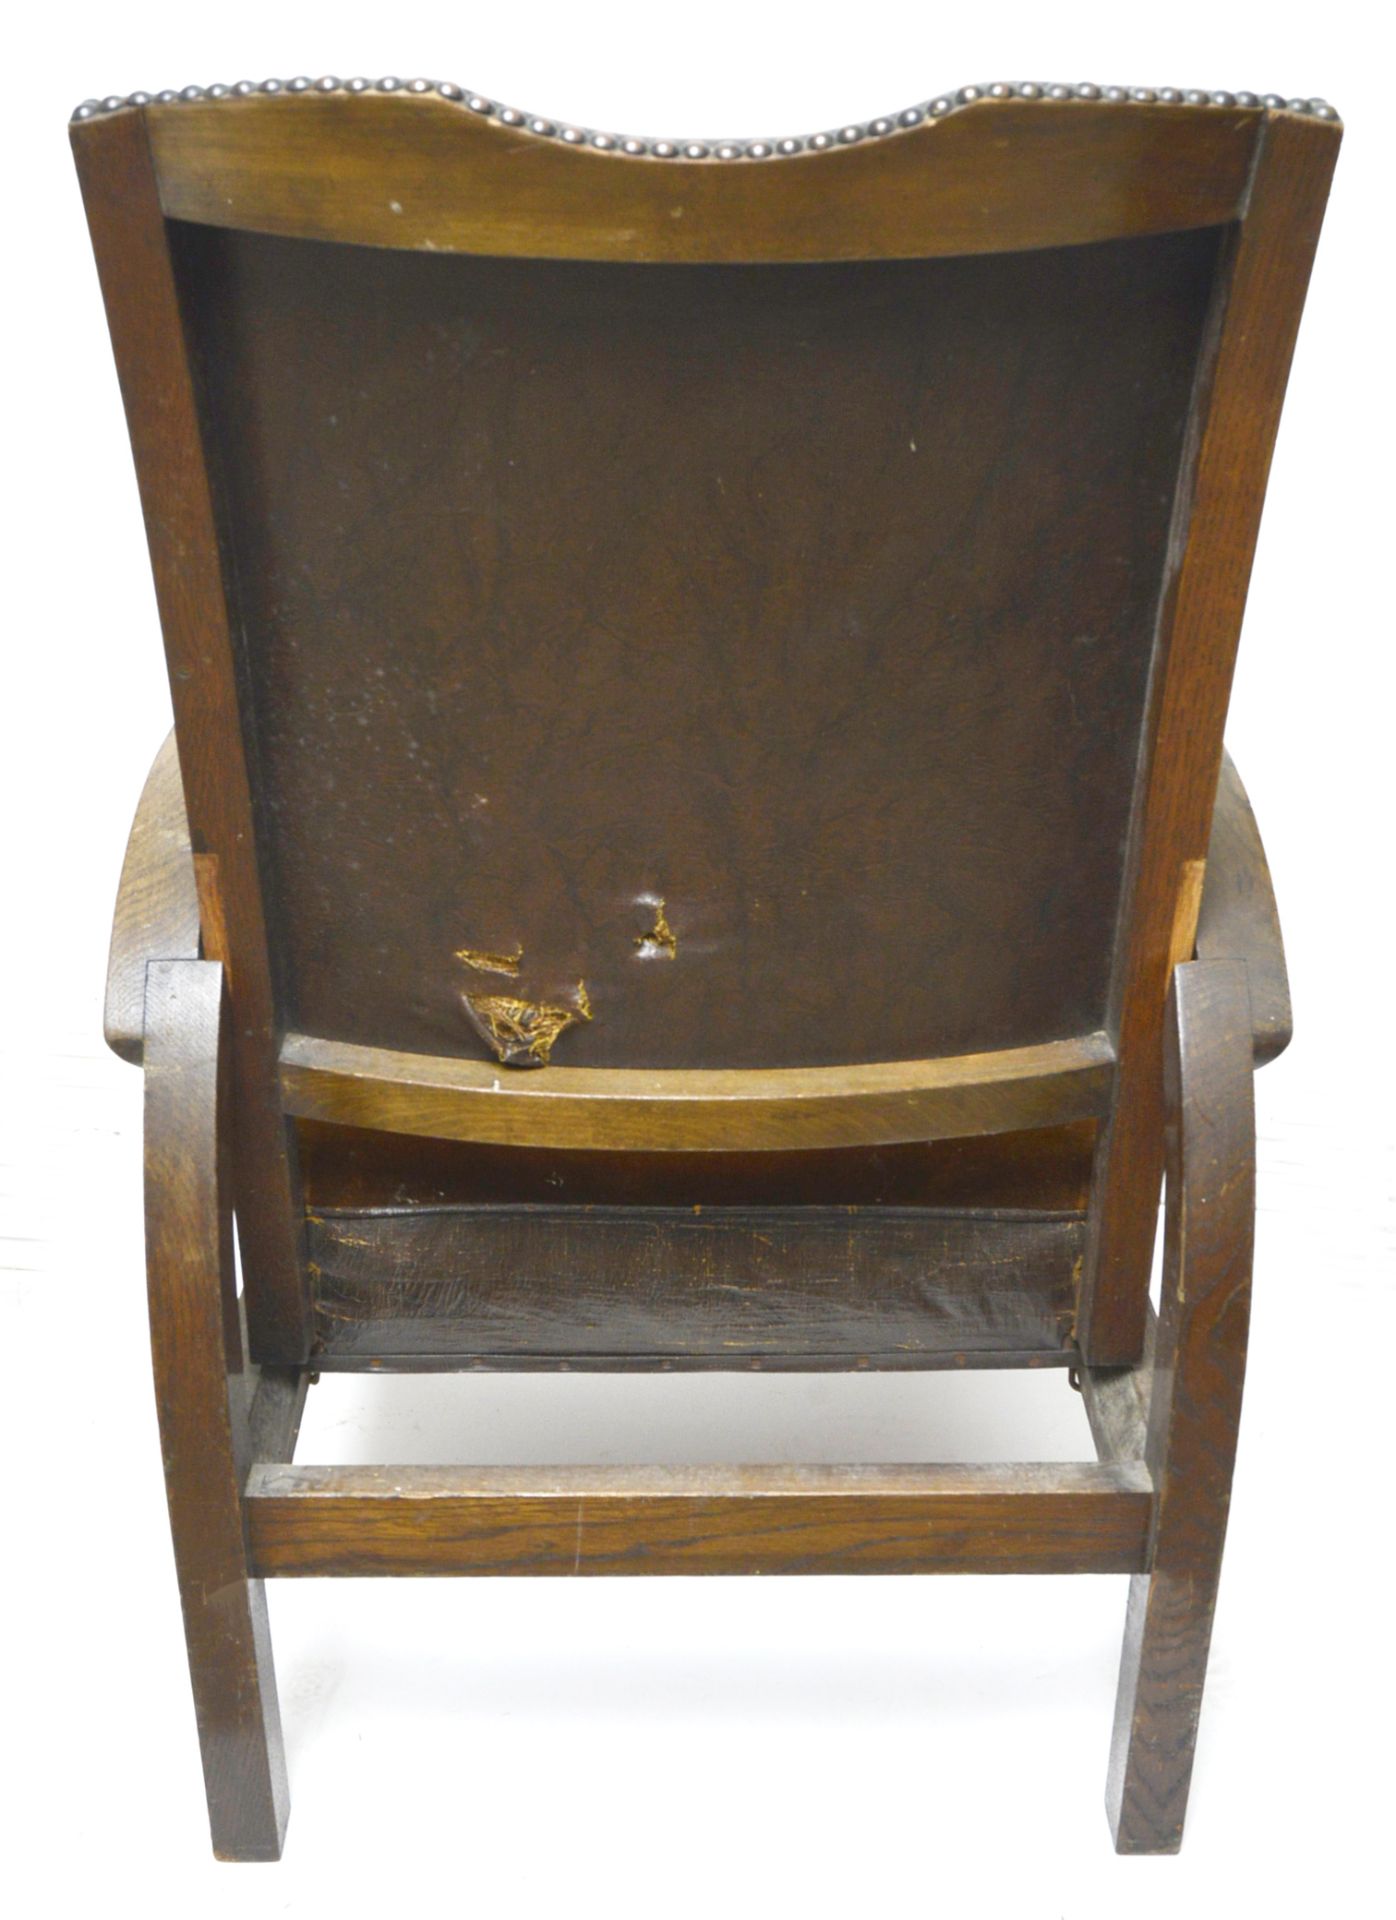 Arts and crafts 1930's quarter sawn Oak reclining Morris/Mission chair. - Image 2 of 4